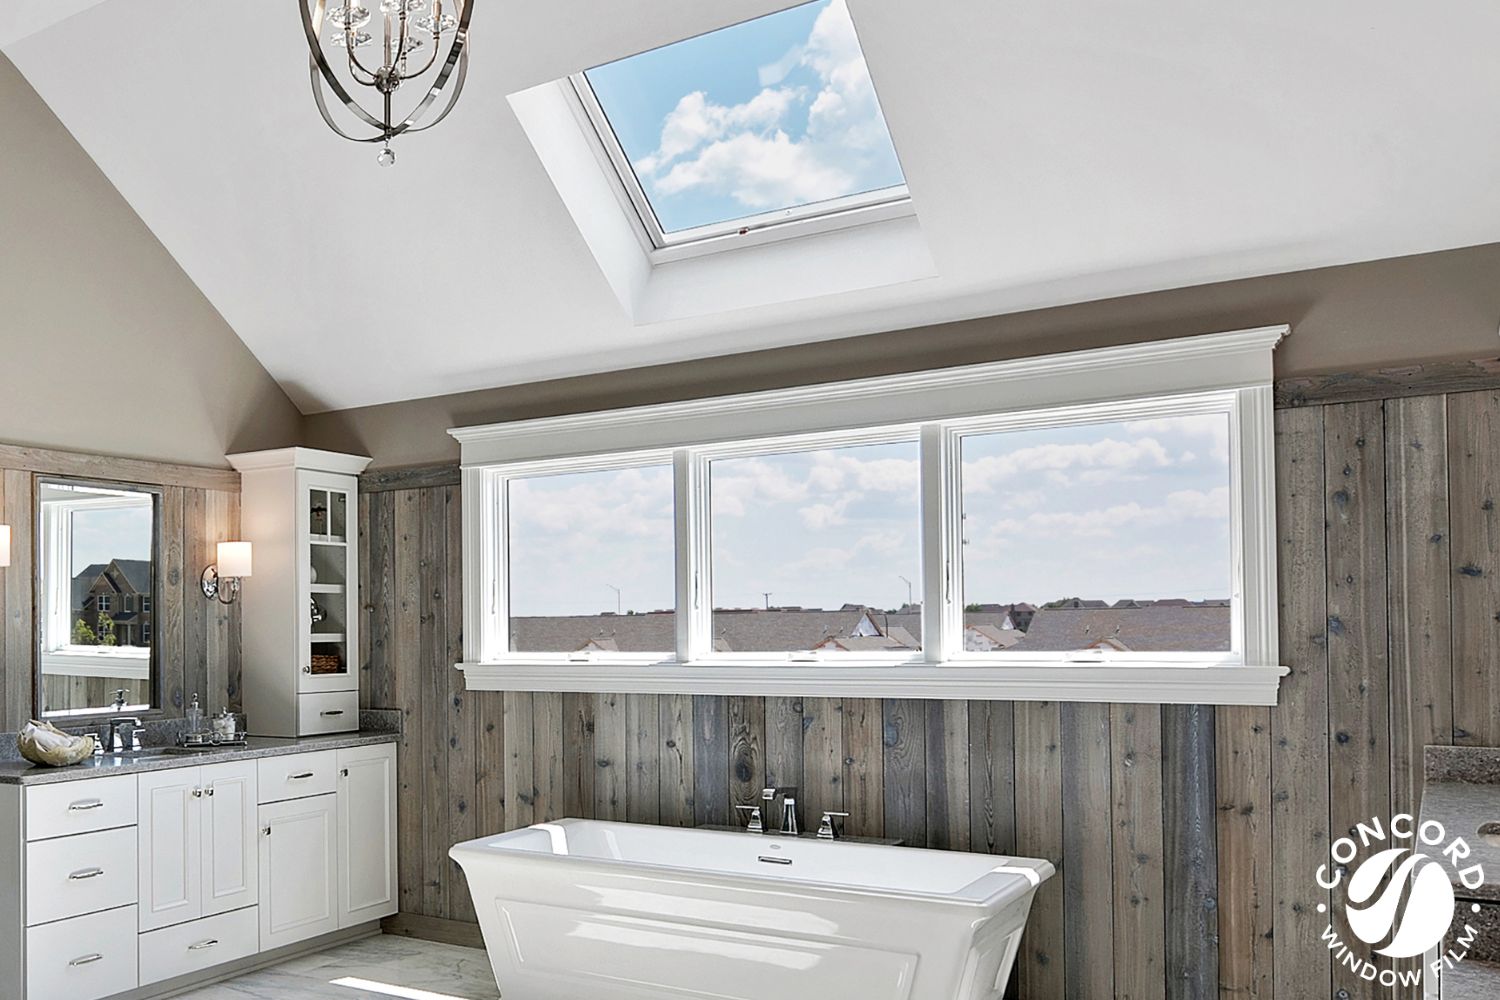 Photo of a sunny bathroom with a skylight over the tub for a post on skylights and window film